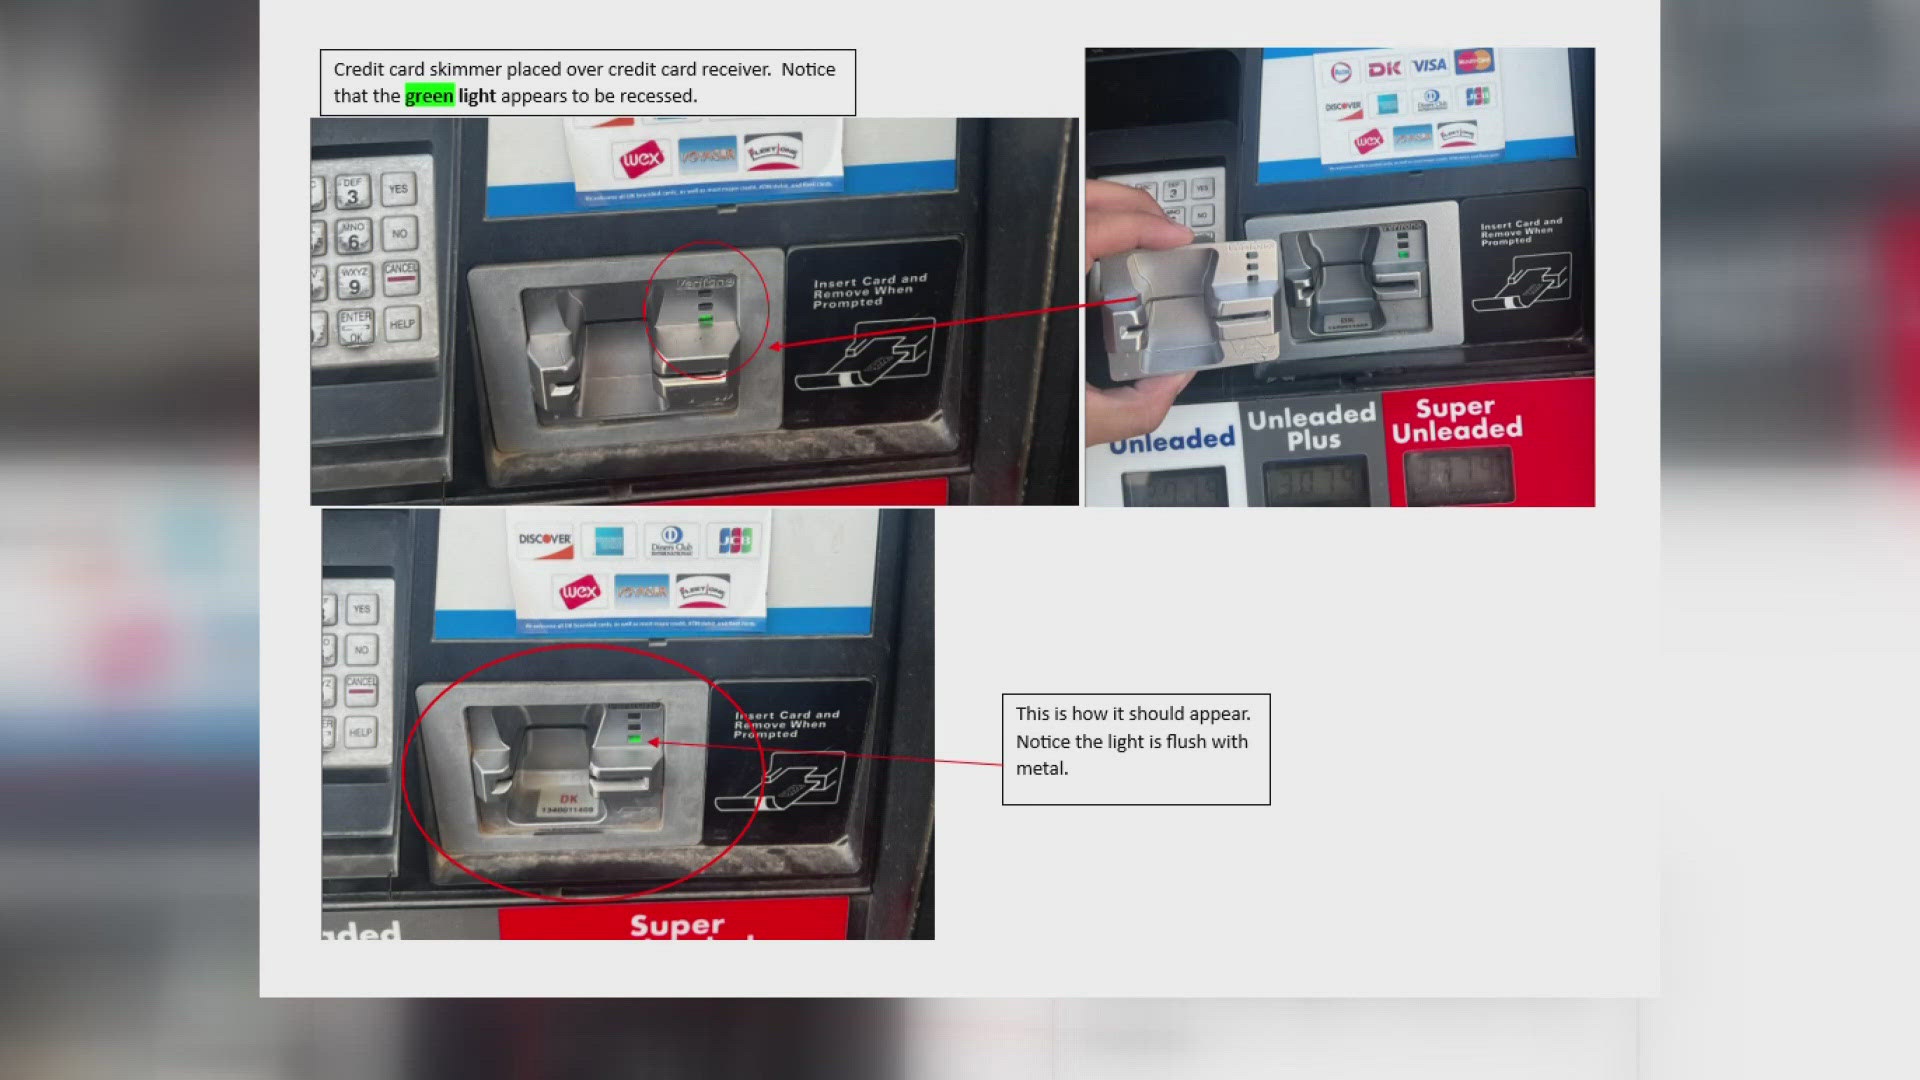 Due to the covert way the skimmers are placed, these devices can be challenging to detect unless one remains vigilant.